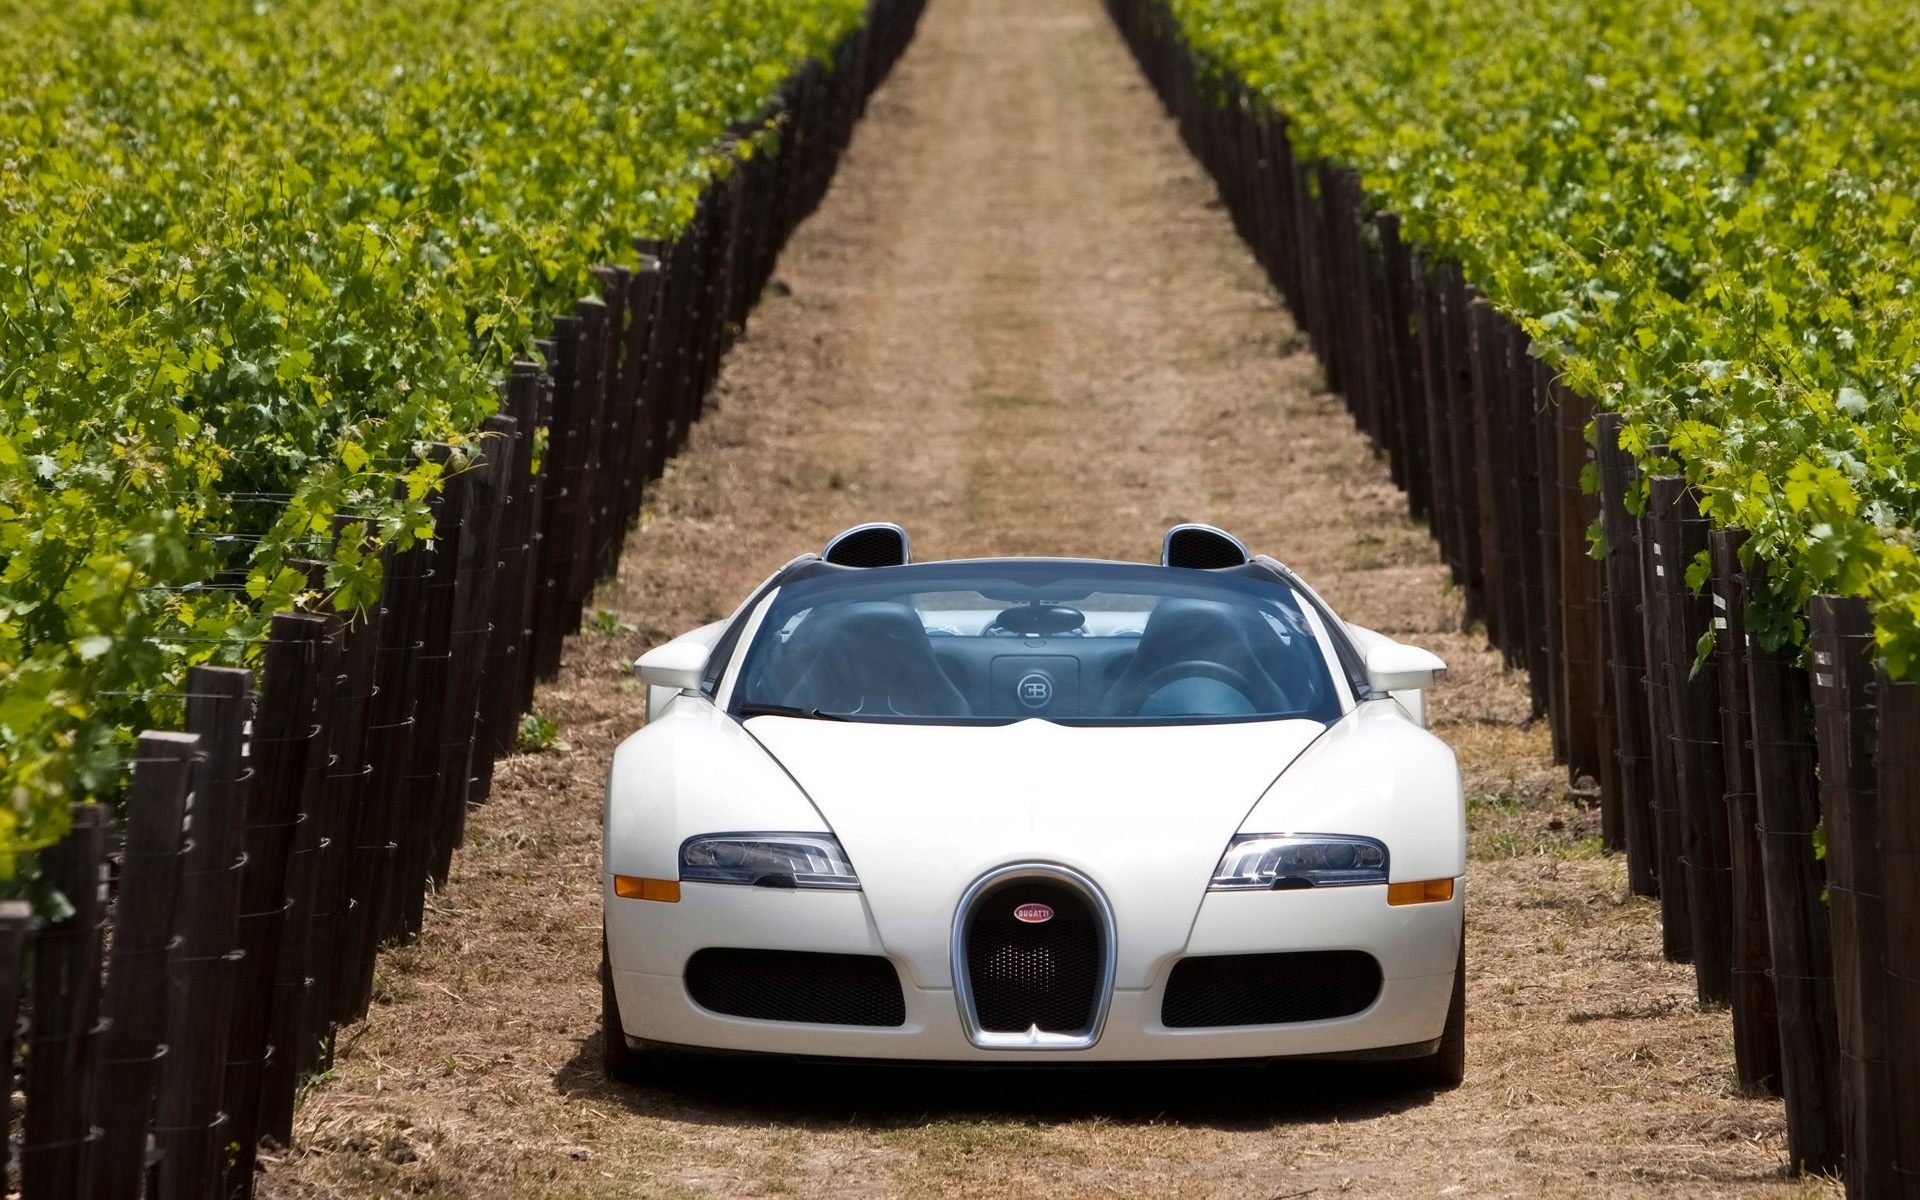 Bugatti Veyron 16.4 Grand Sport 2010 in Napa Valley - Front 3 for 1920 x 1200 widescreen resolution